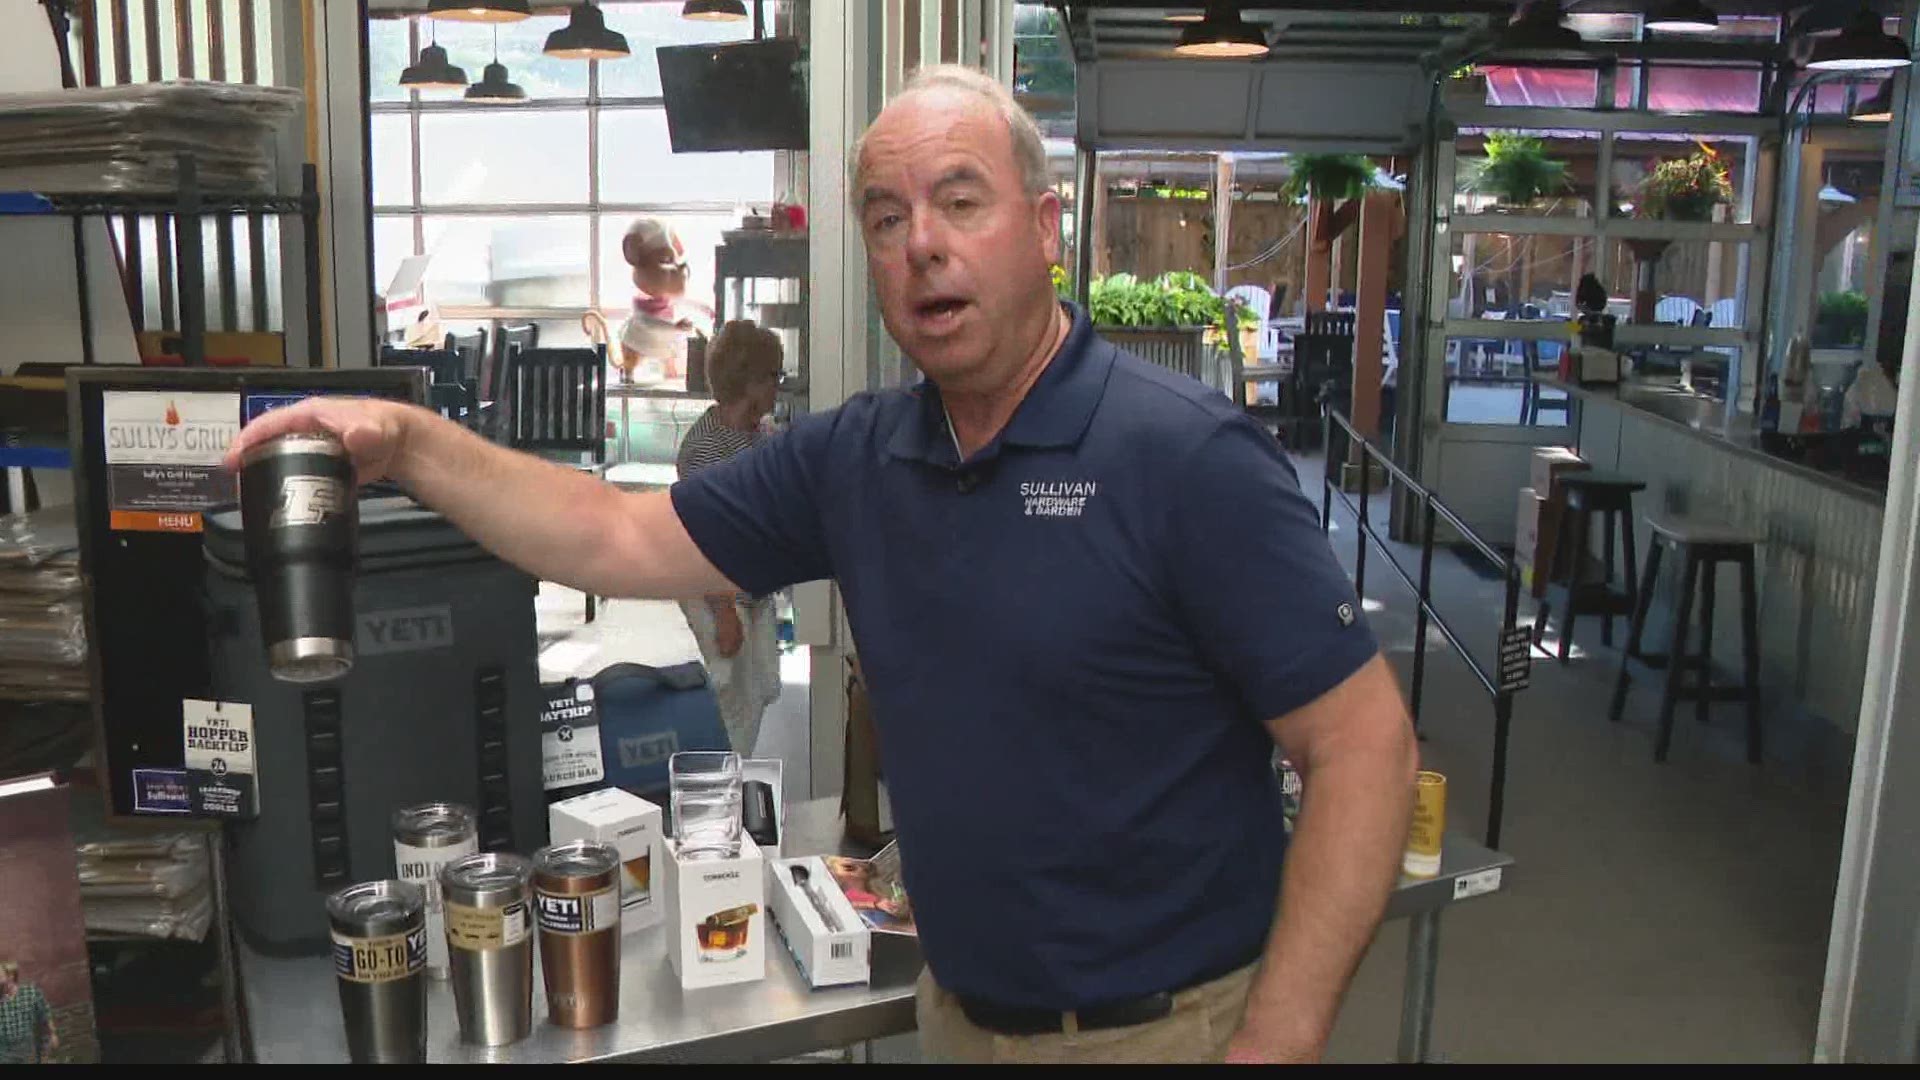 Fathers Day is next Sunday and Pat Sullivan has plenty of gift ideas for dad.